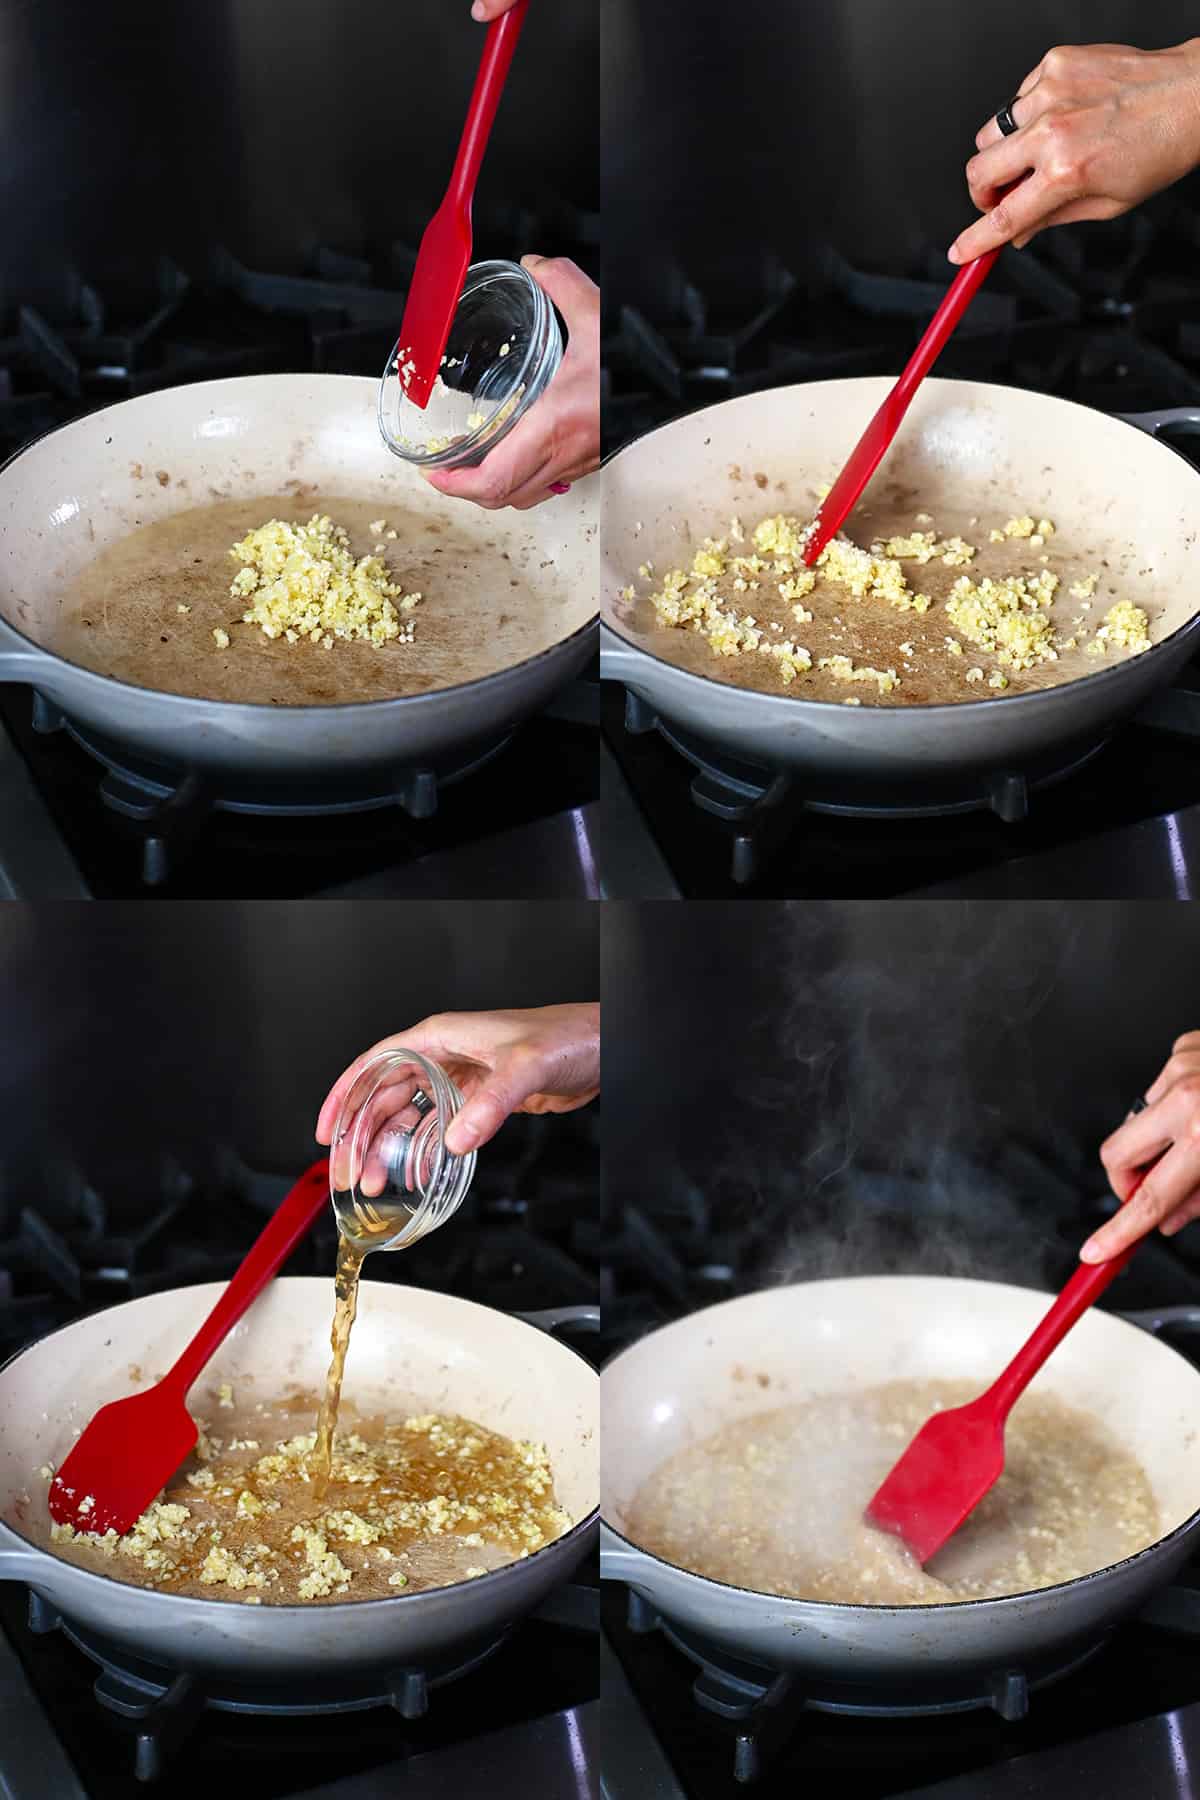 Four sequential shots that show someone adding minced garlic into an empty pan and then pouring in chicken broth and stirring it around with a red spatula.